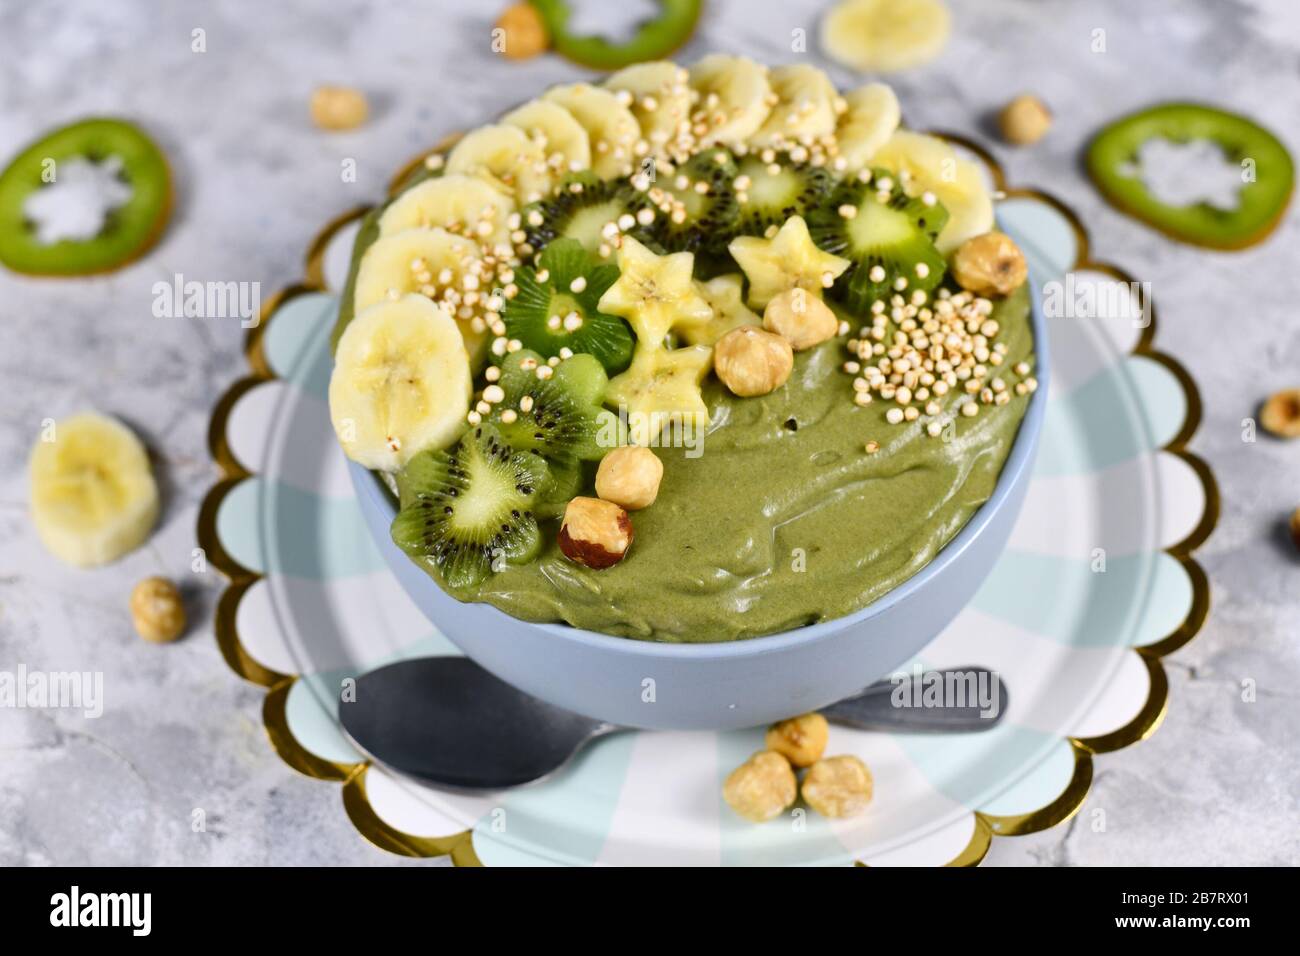 Green fruit smoothie bowl topped with star shaped banana, kiwi, hazelnut and puffed quinoa grain on gray background Stock Photo